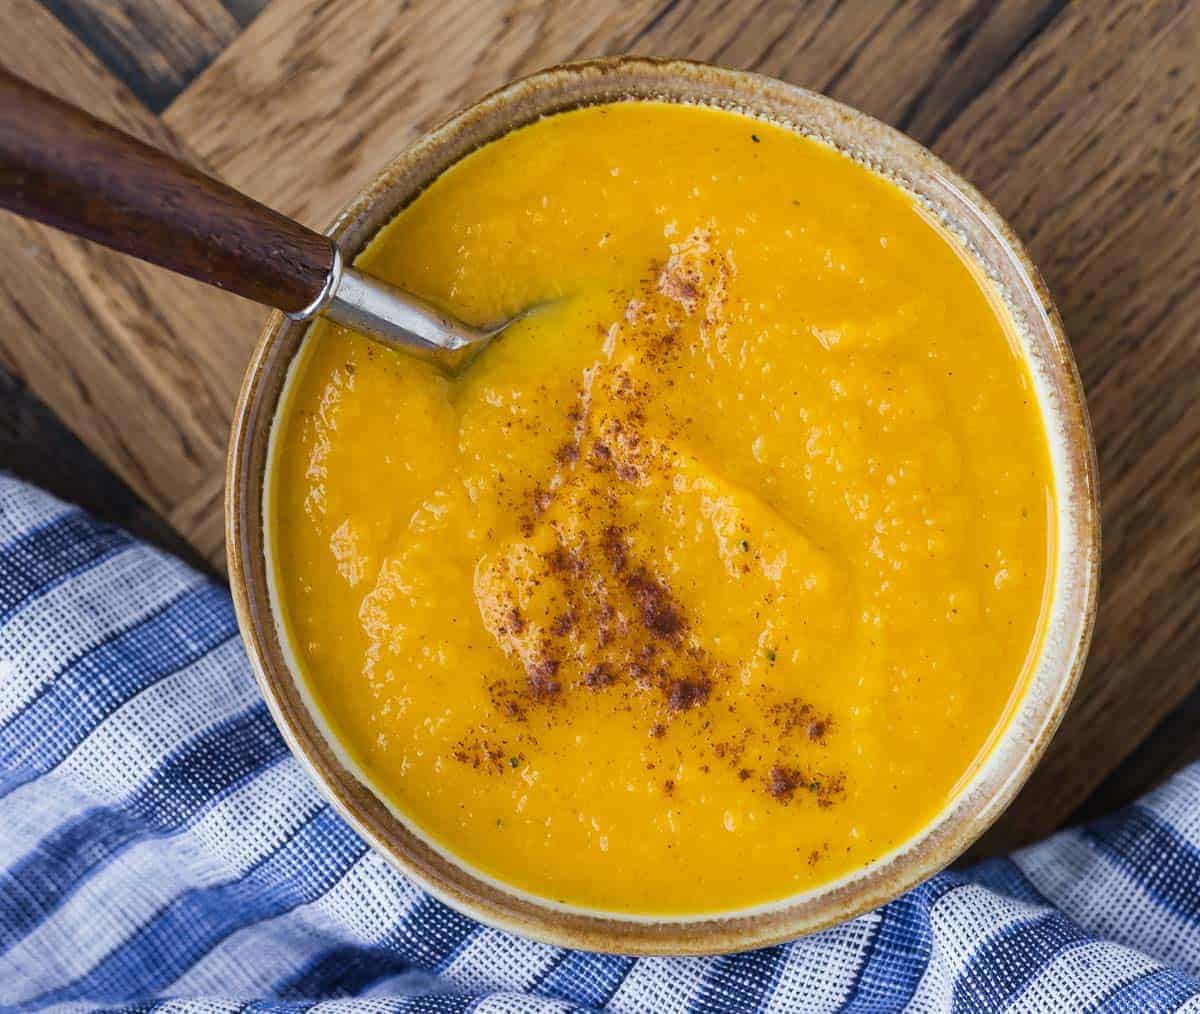 Bowl of orange colored squash bisque in a natural tone bowl with a wooden handled spoon.